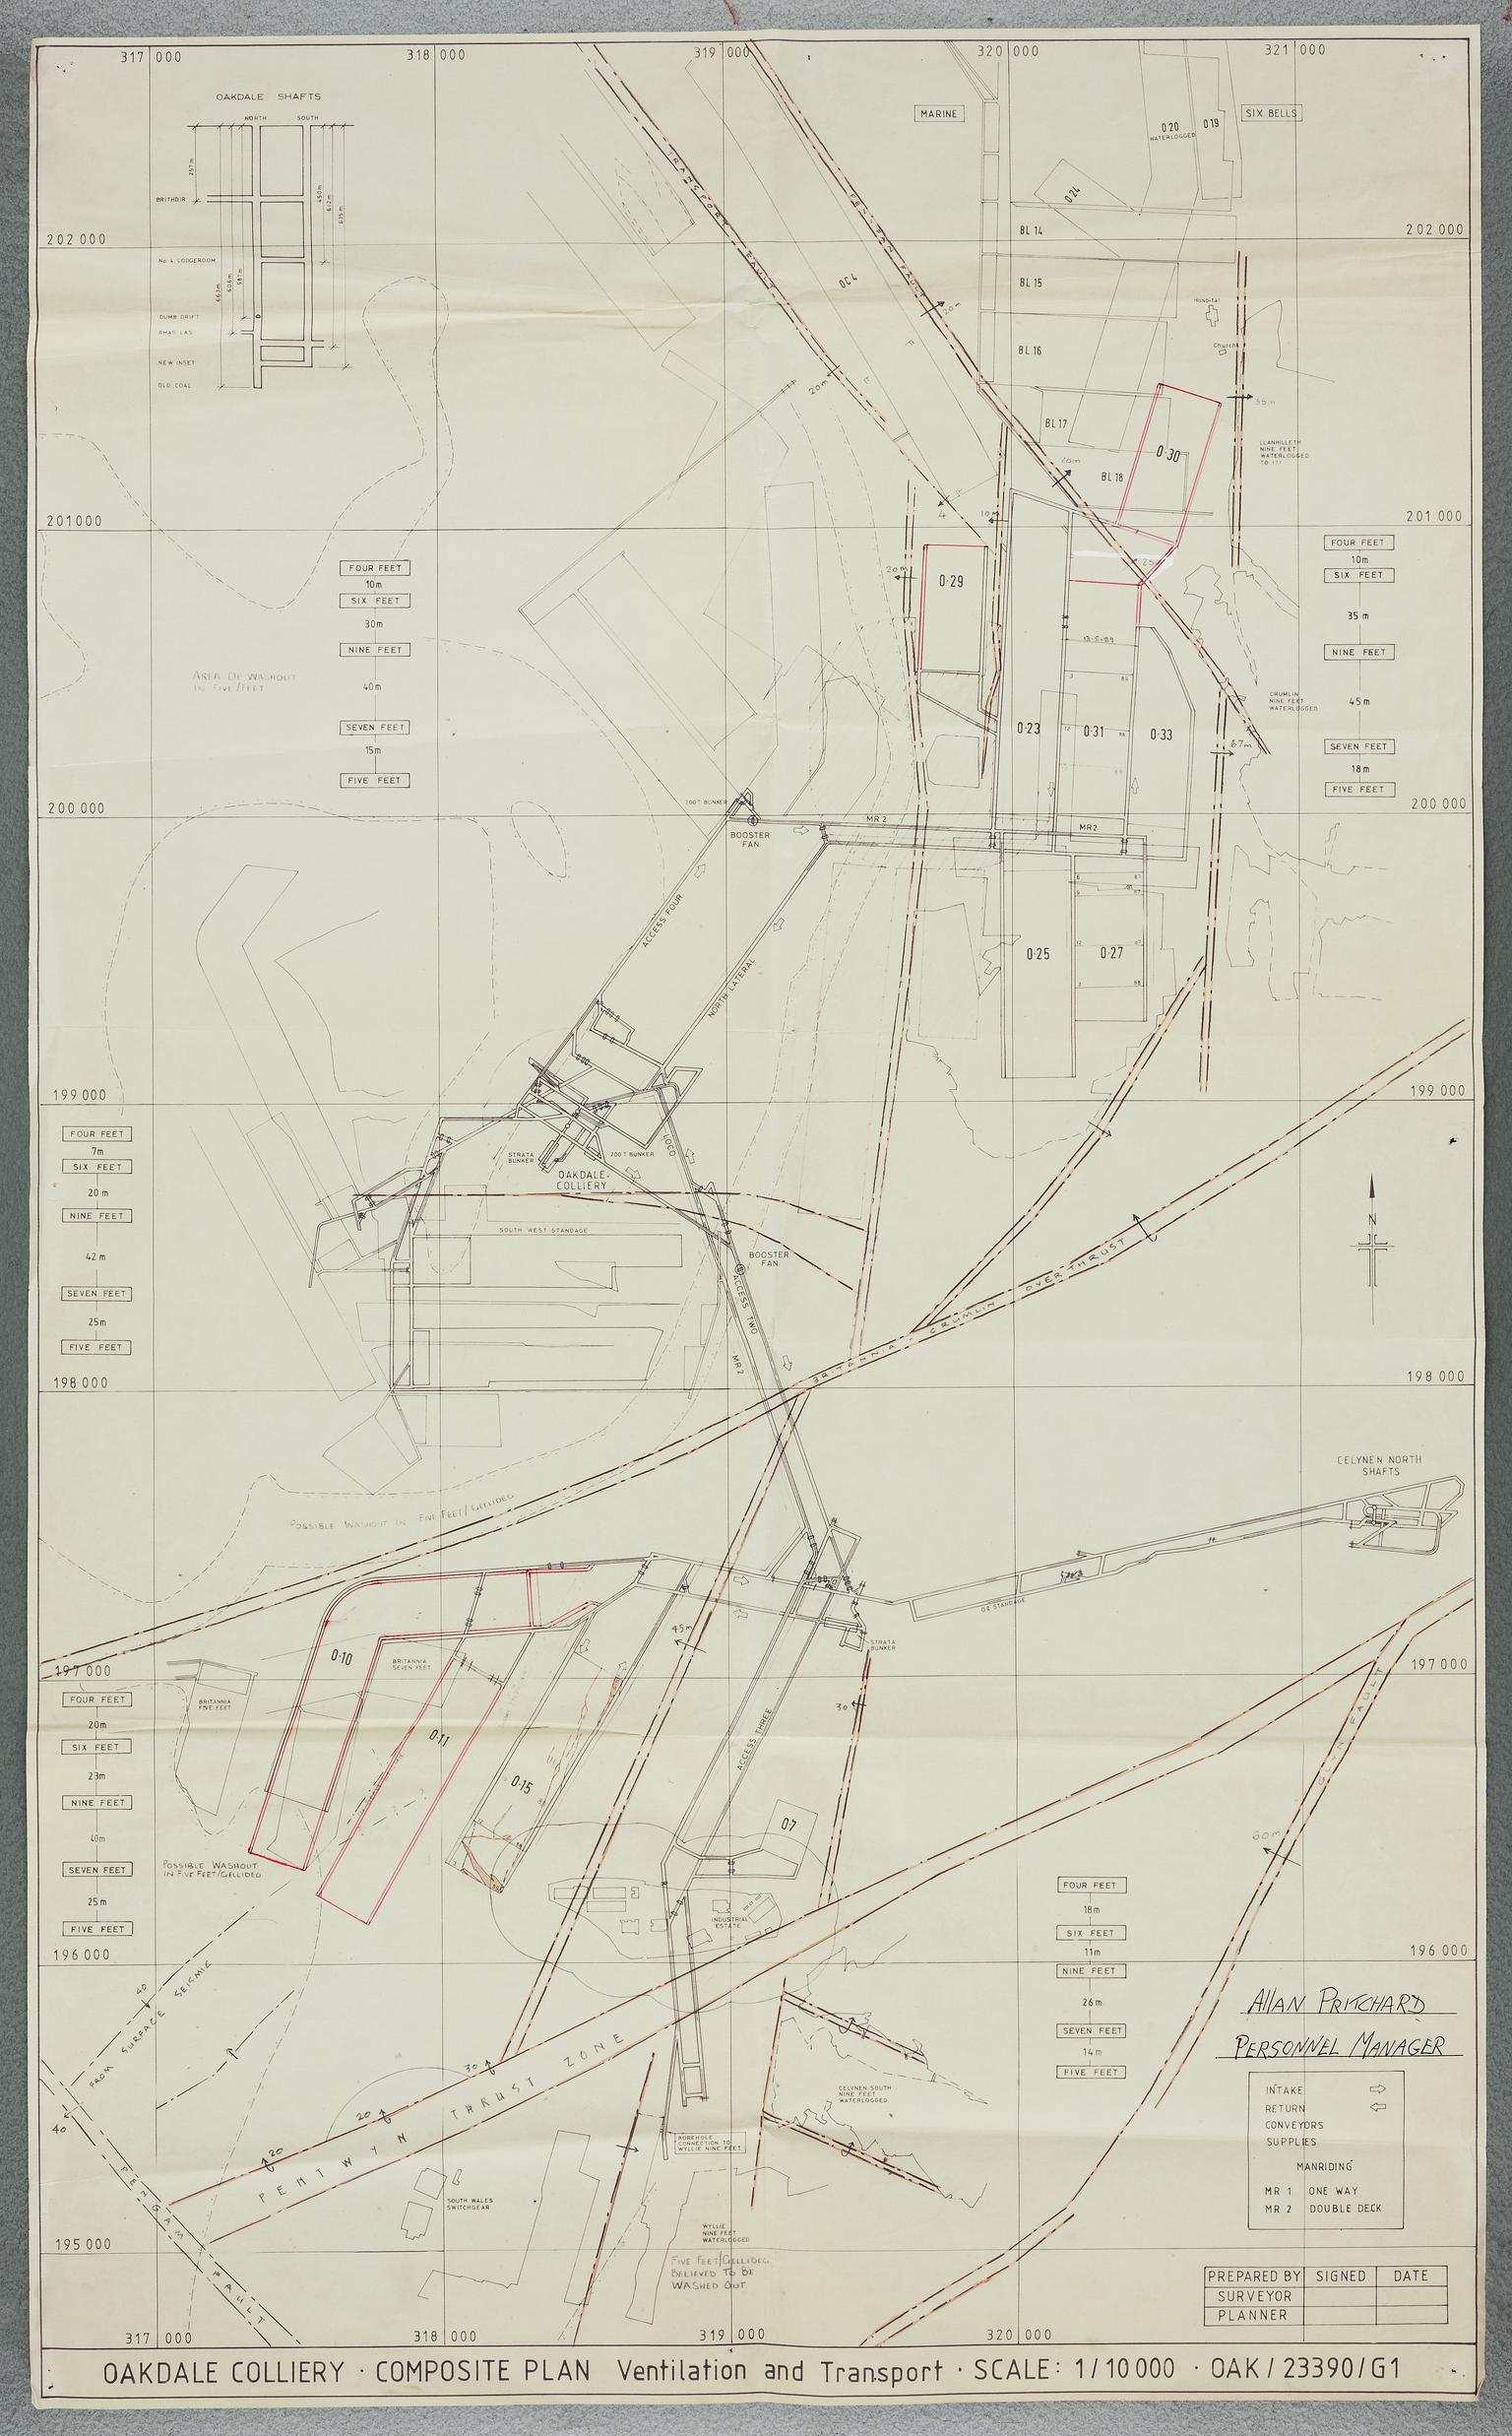 Oakdale Colliery Composite Ventilation and Transport (plan)